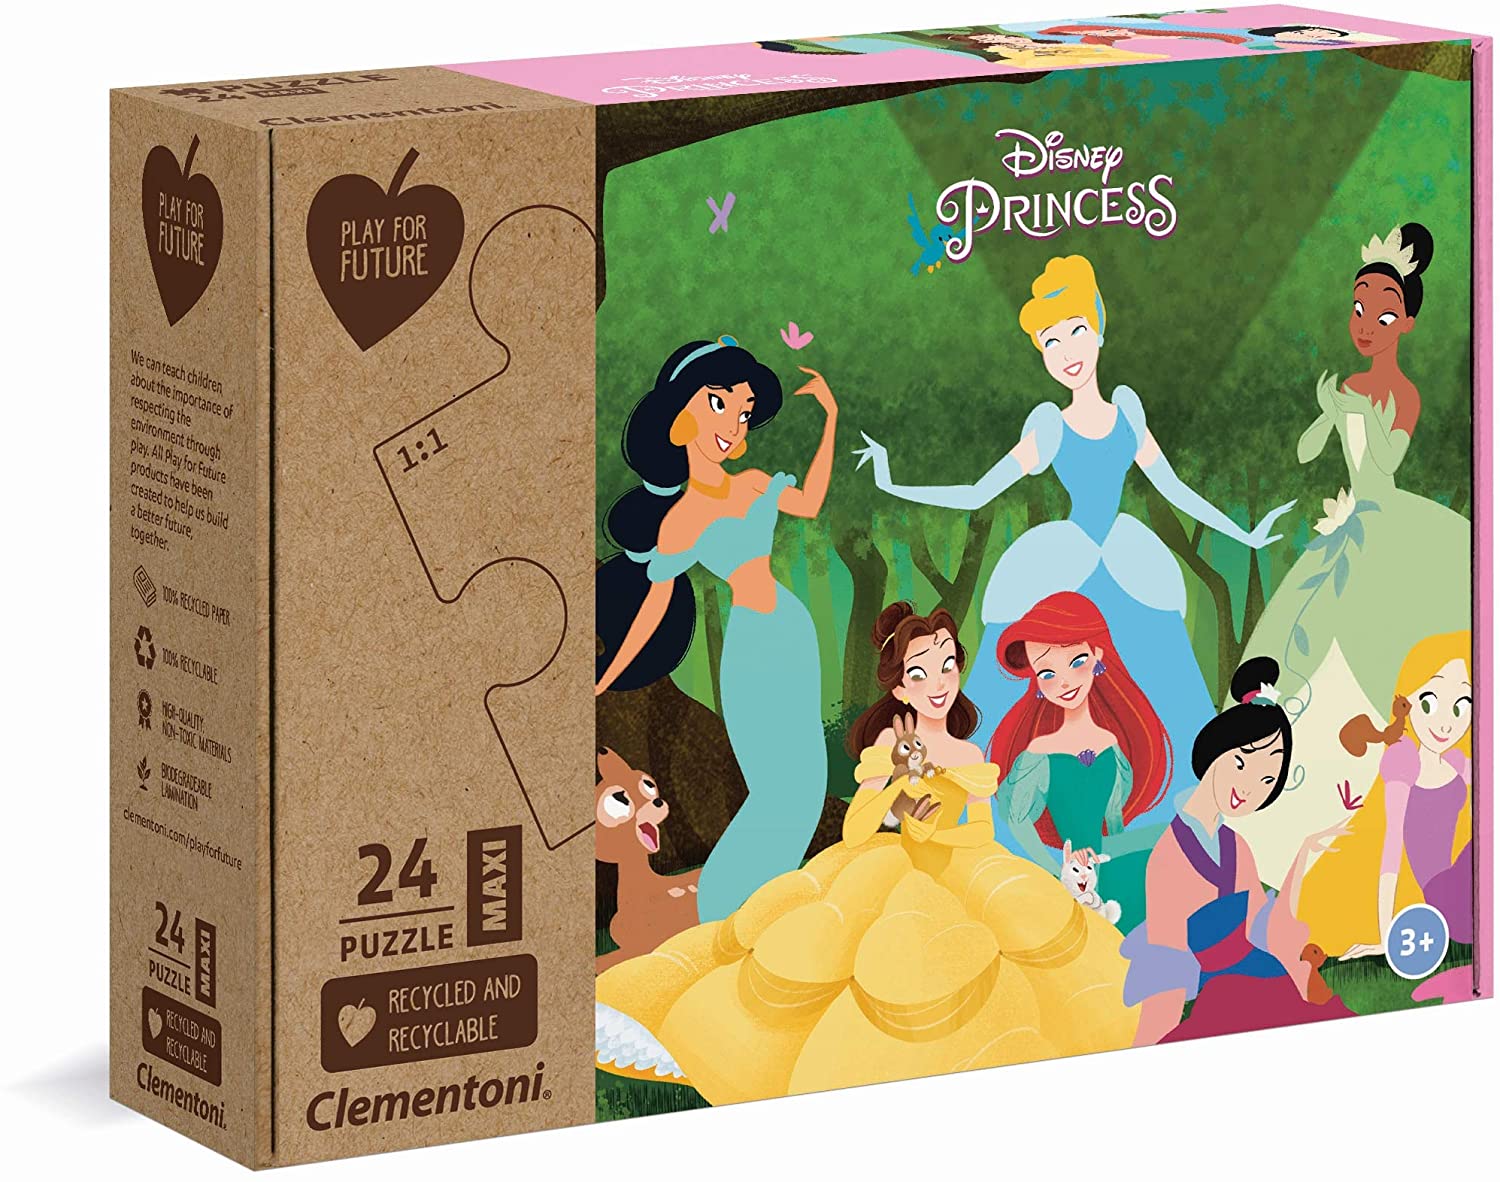 Clementoni 20257 - Princess - 24 Teile Puzzle -  Special Series Puzzle - Maxi Play for Future